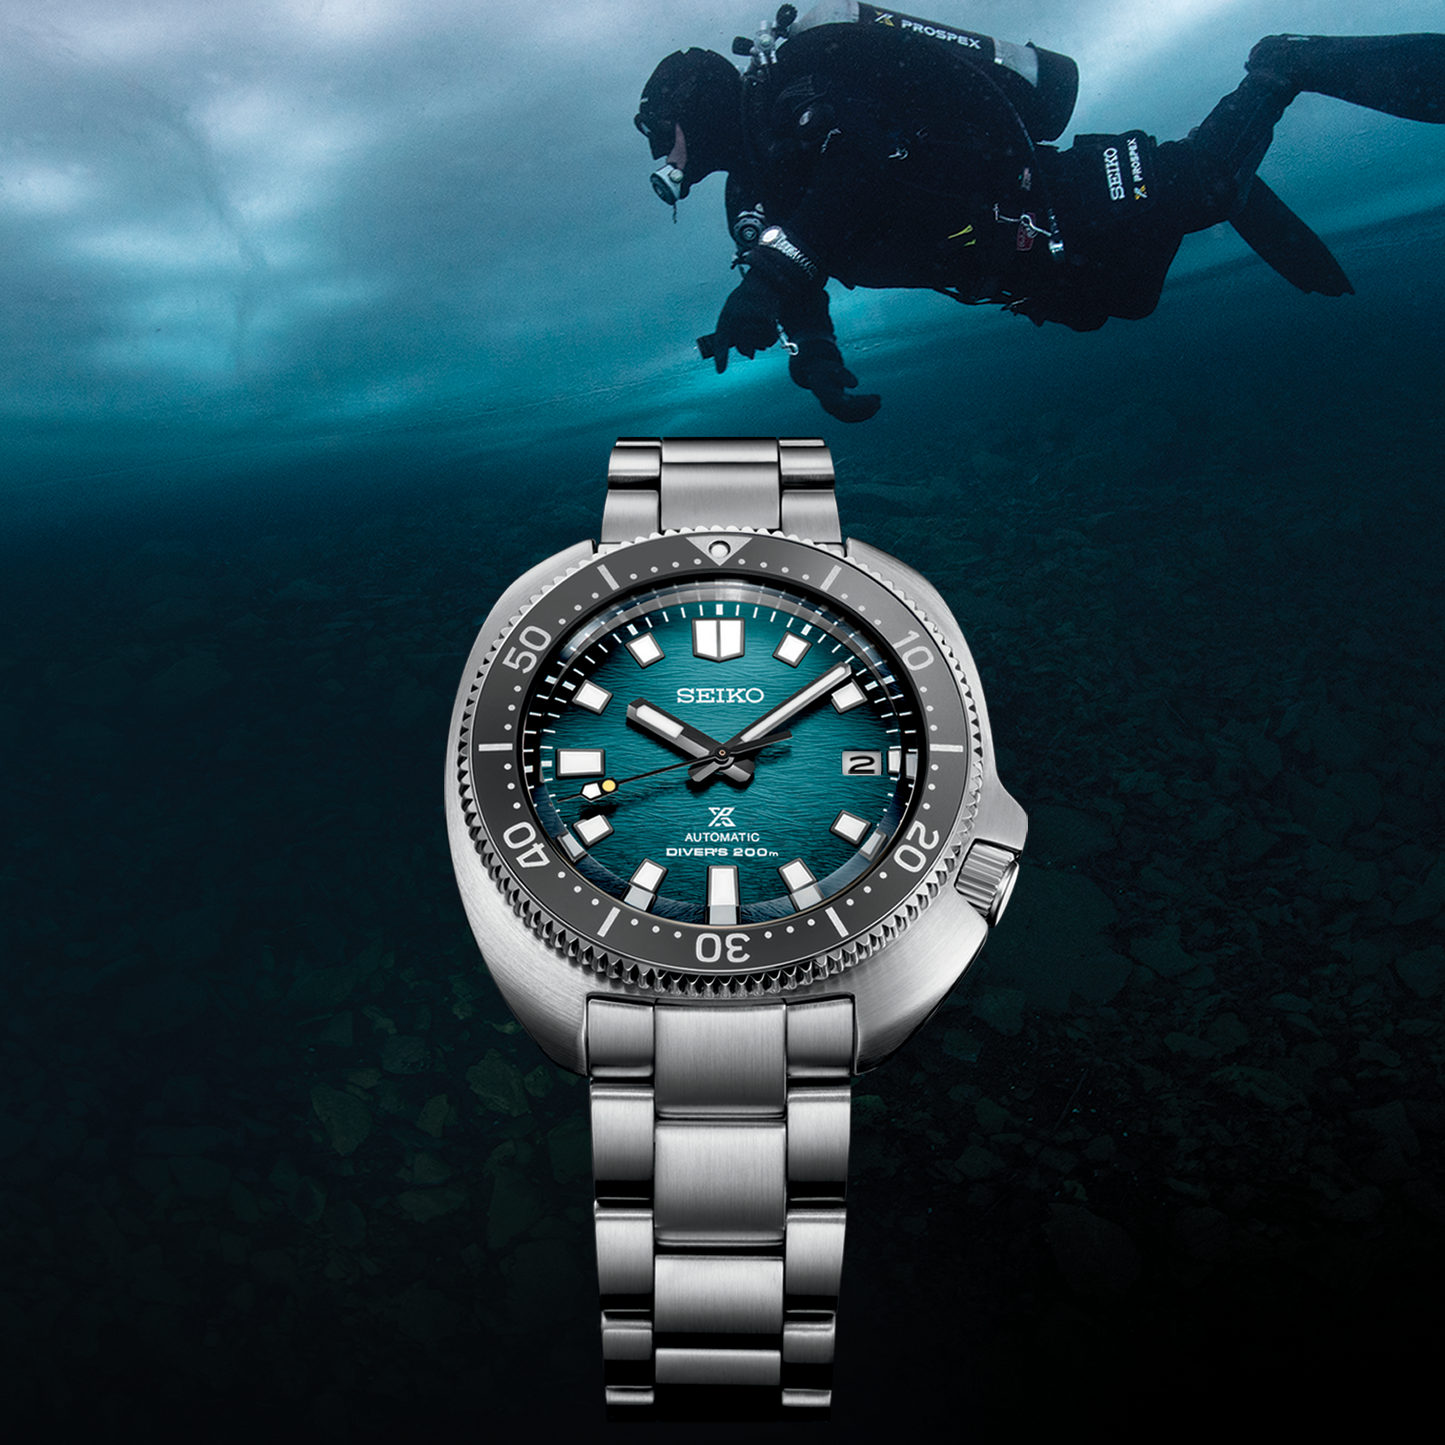 SPB265 PROSPEX BUILT FOR THE ICE DIVER U.S. SPECIAL EDITION